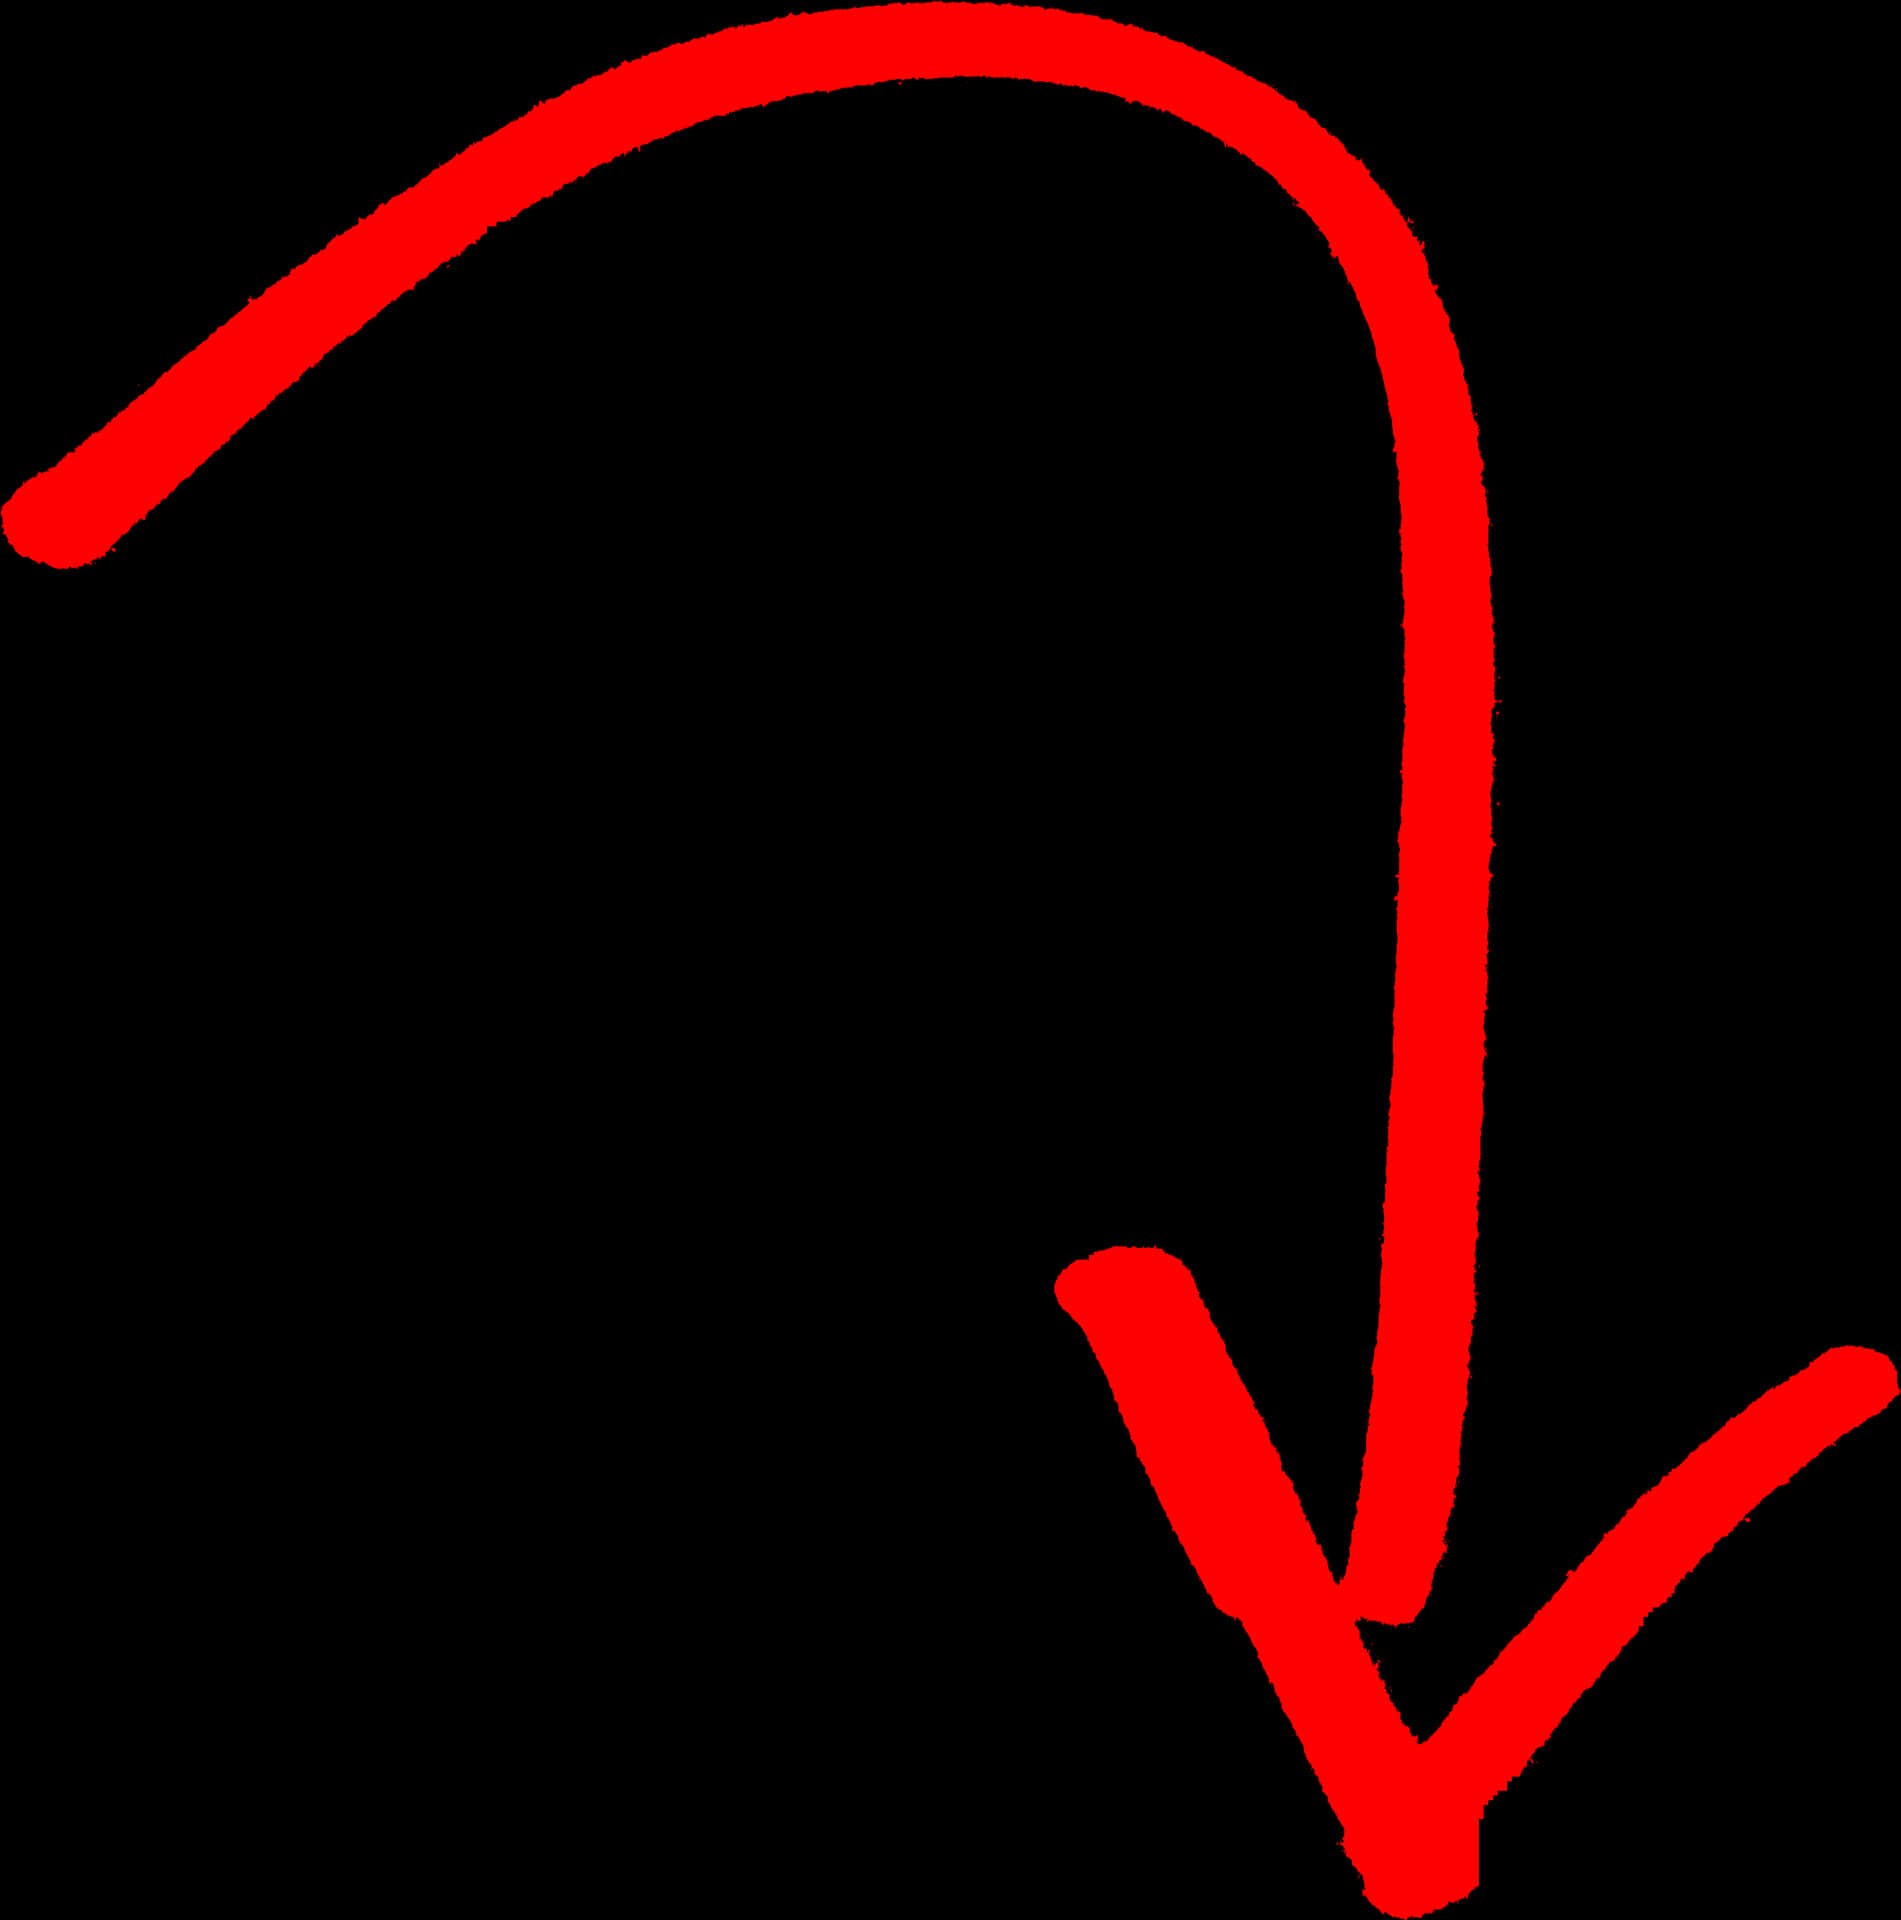 Red Arrow Curving Downward PNG image